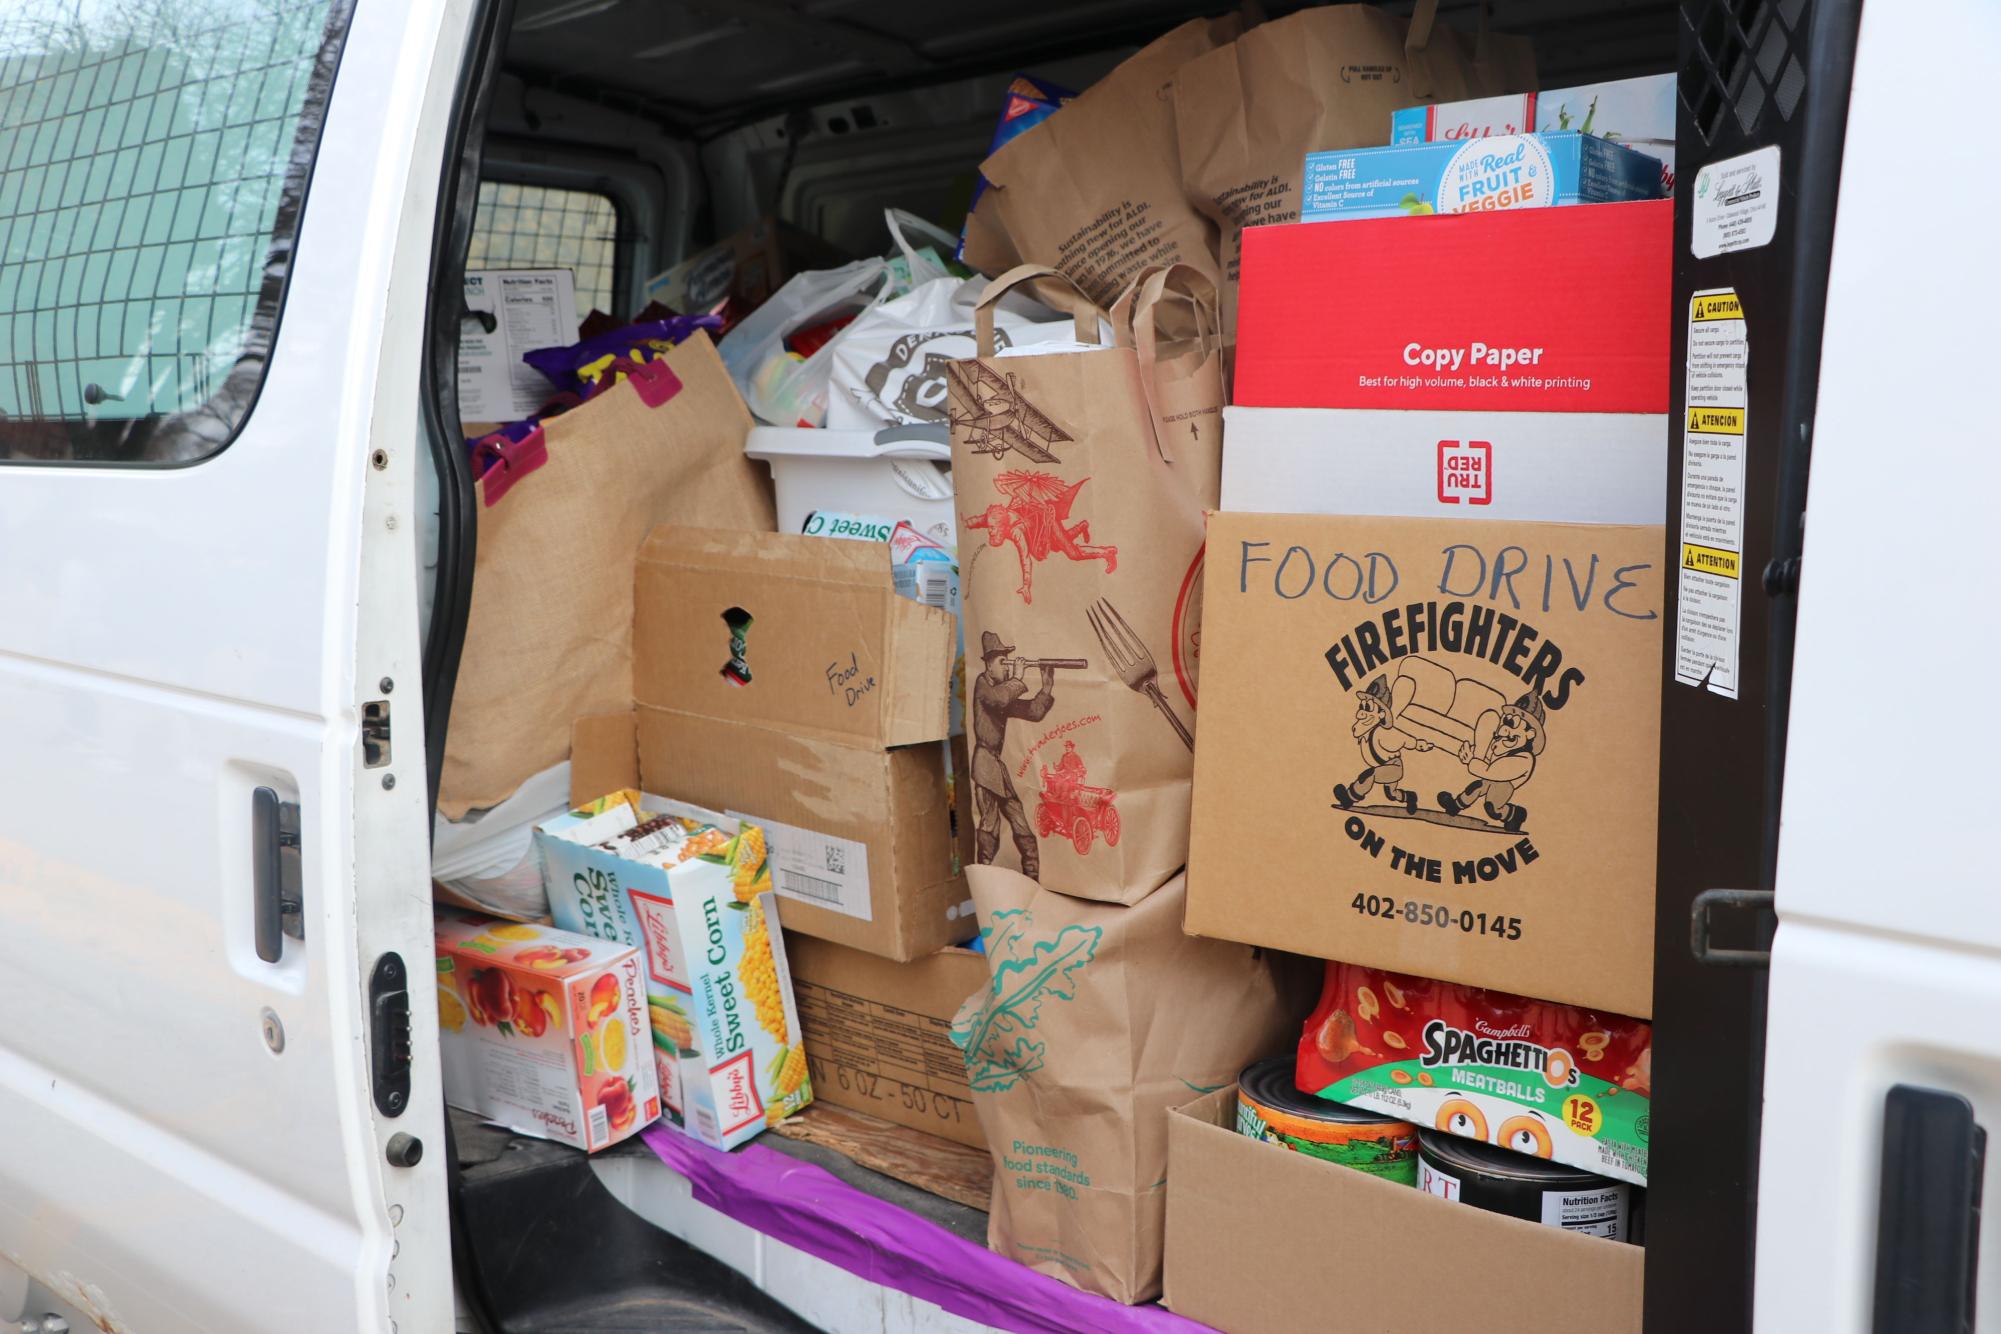 The fall food drive was so successful that donations overflowed from Completely Kids transport van into a second vehicle.